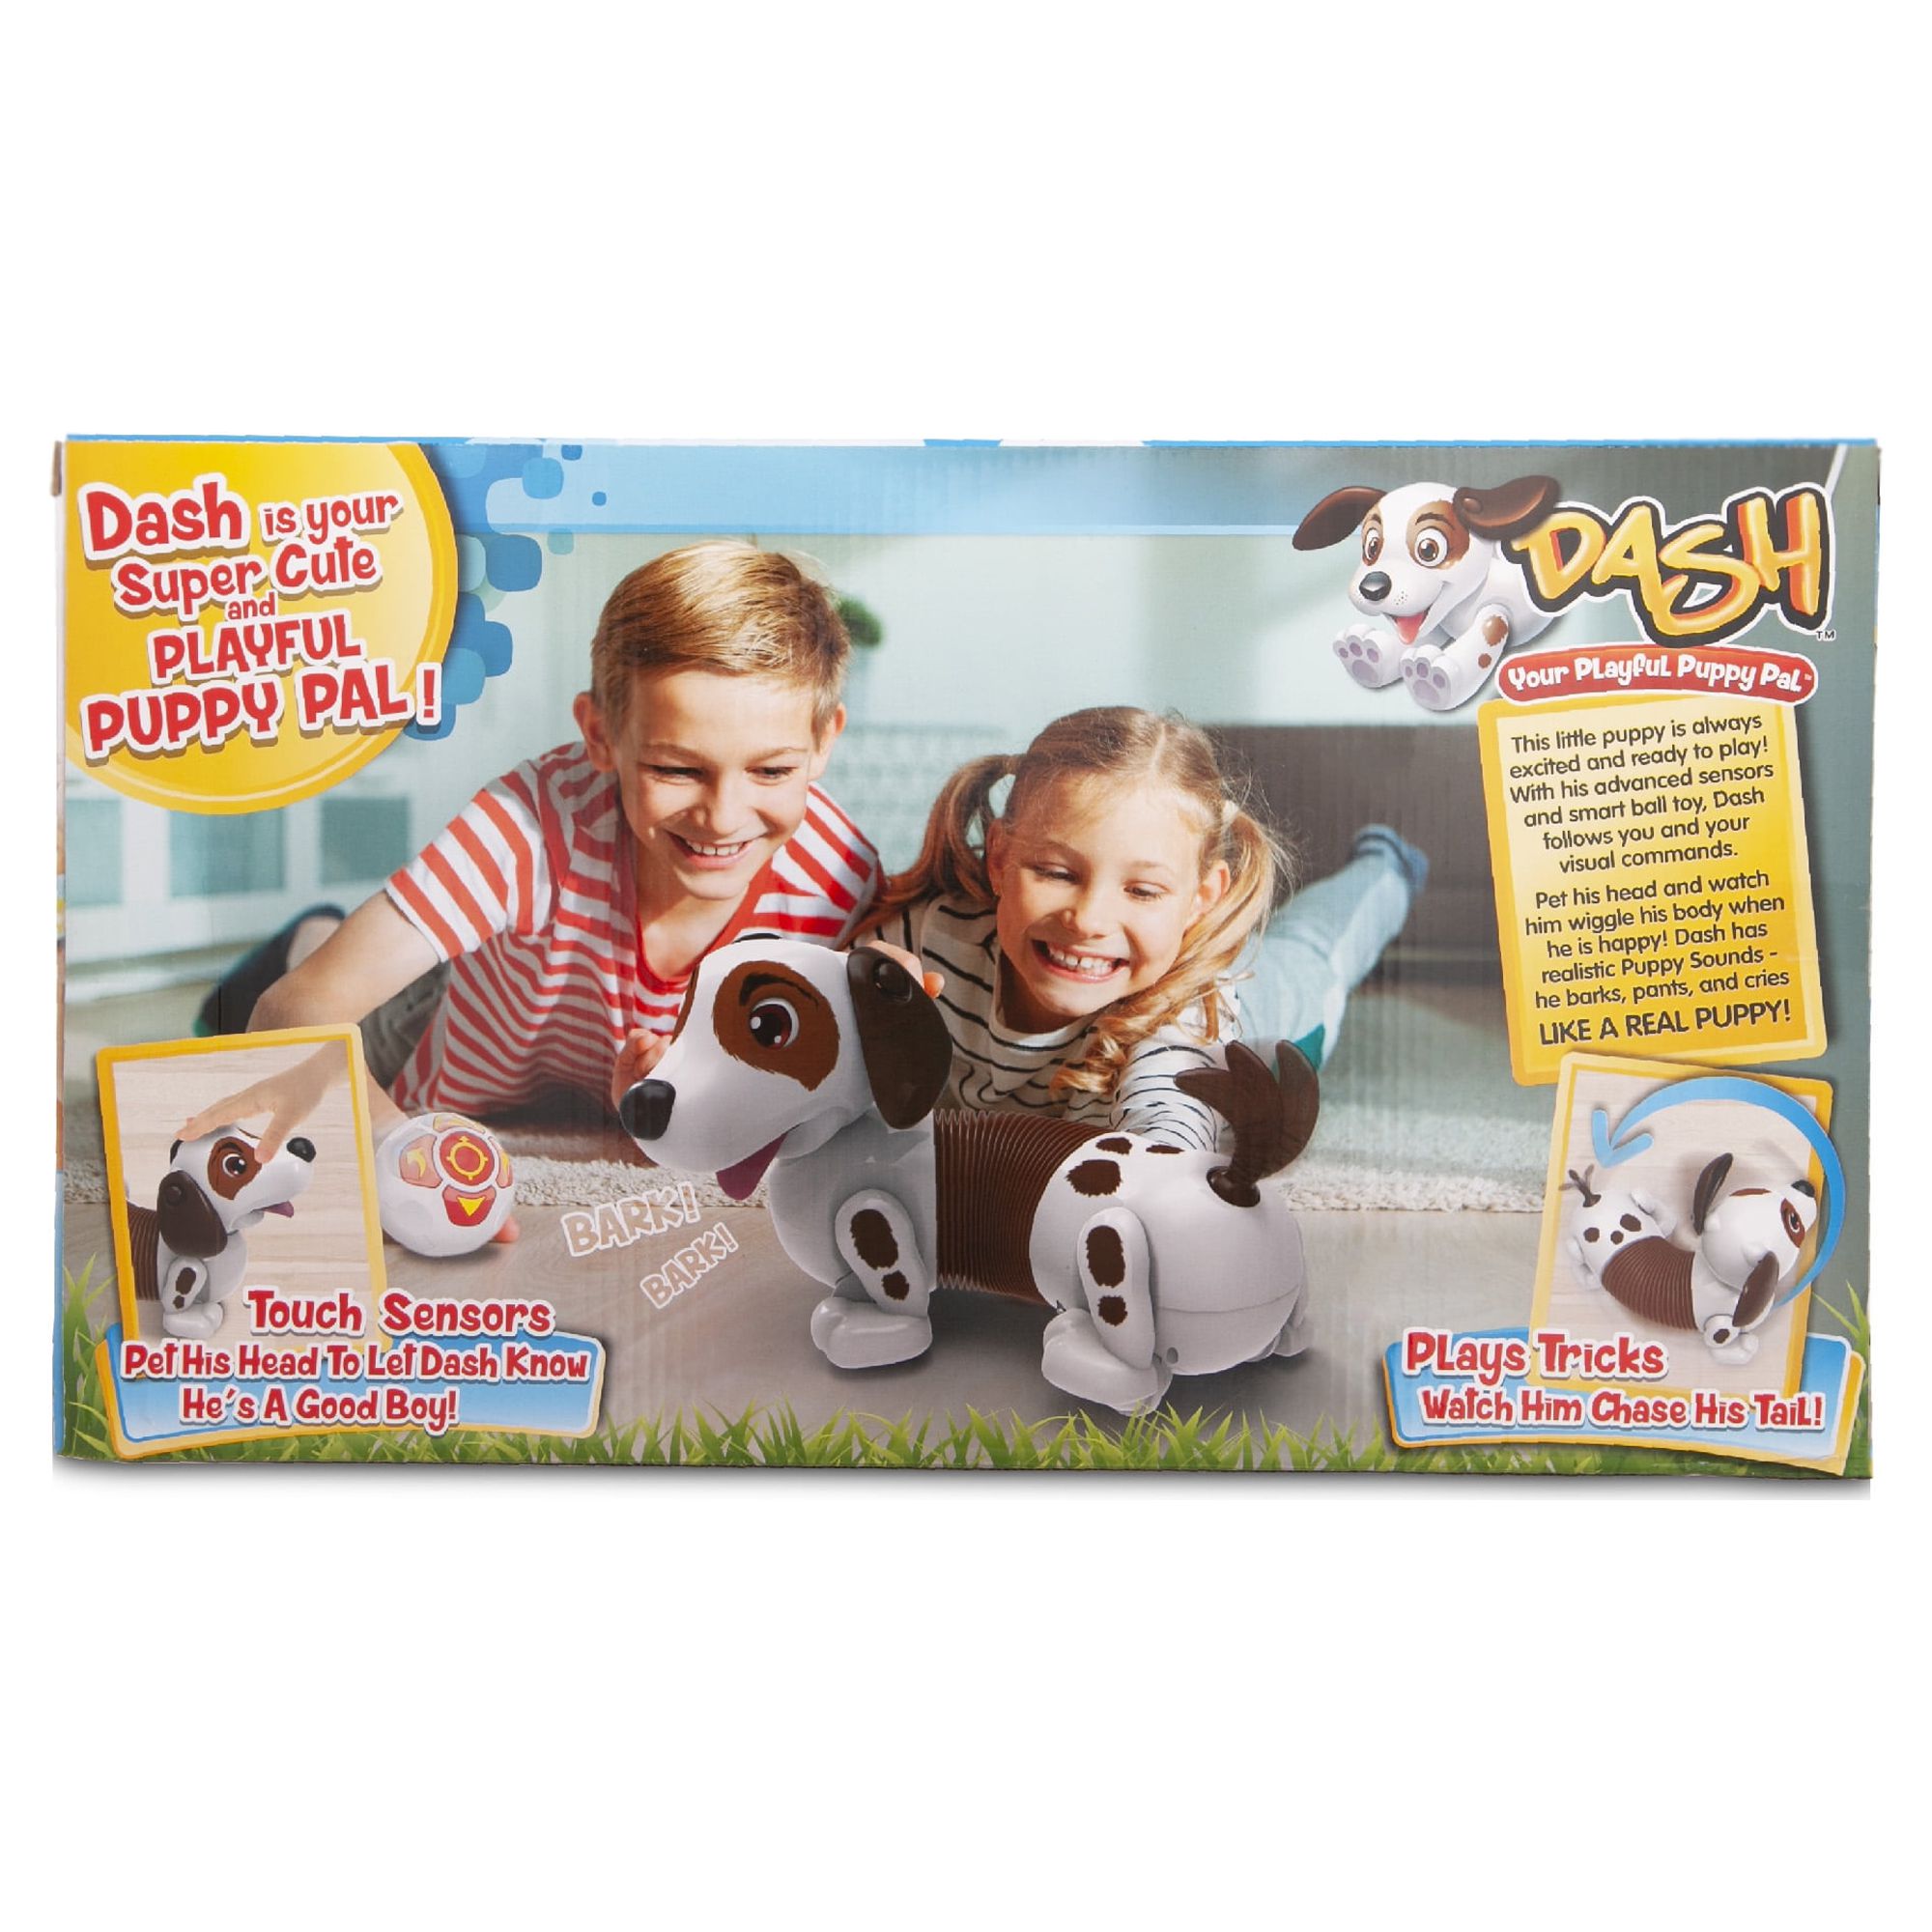 Dash - Your Playful Puppy Pal - Electronic Pet - image 3 of 11